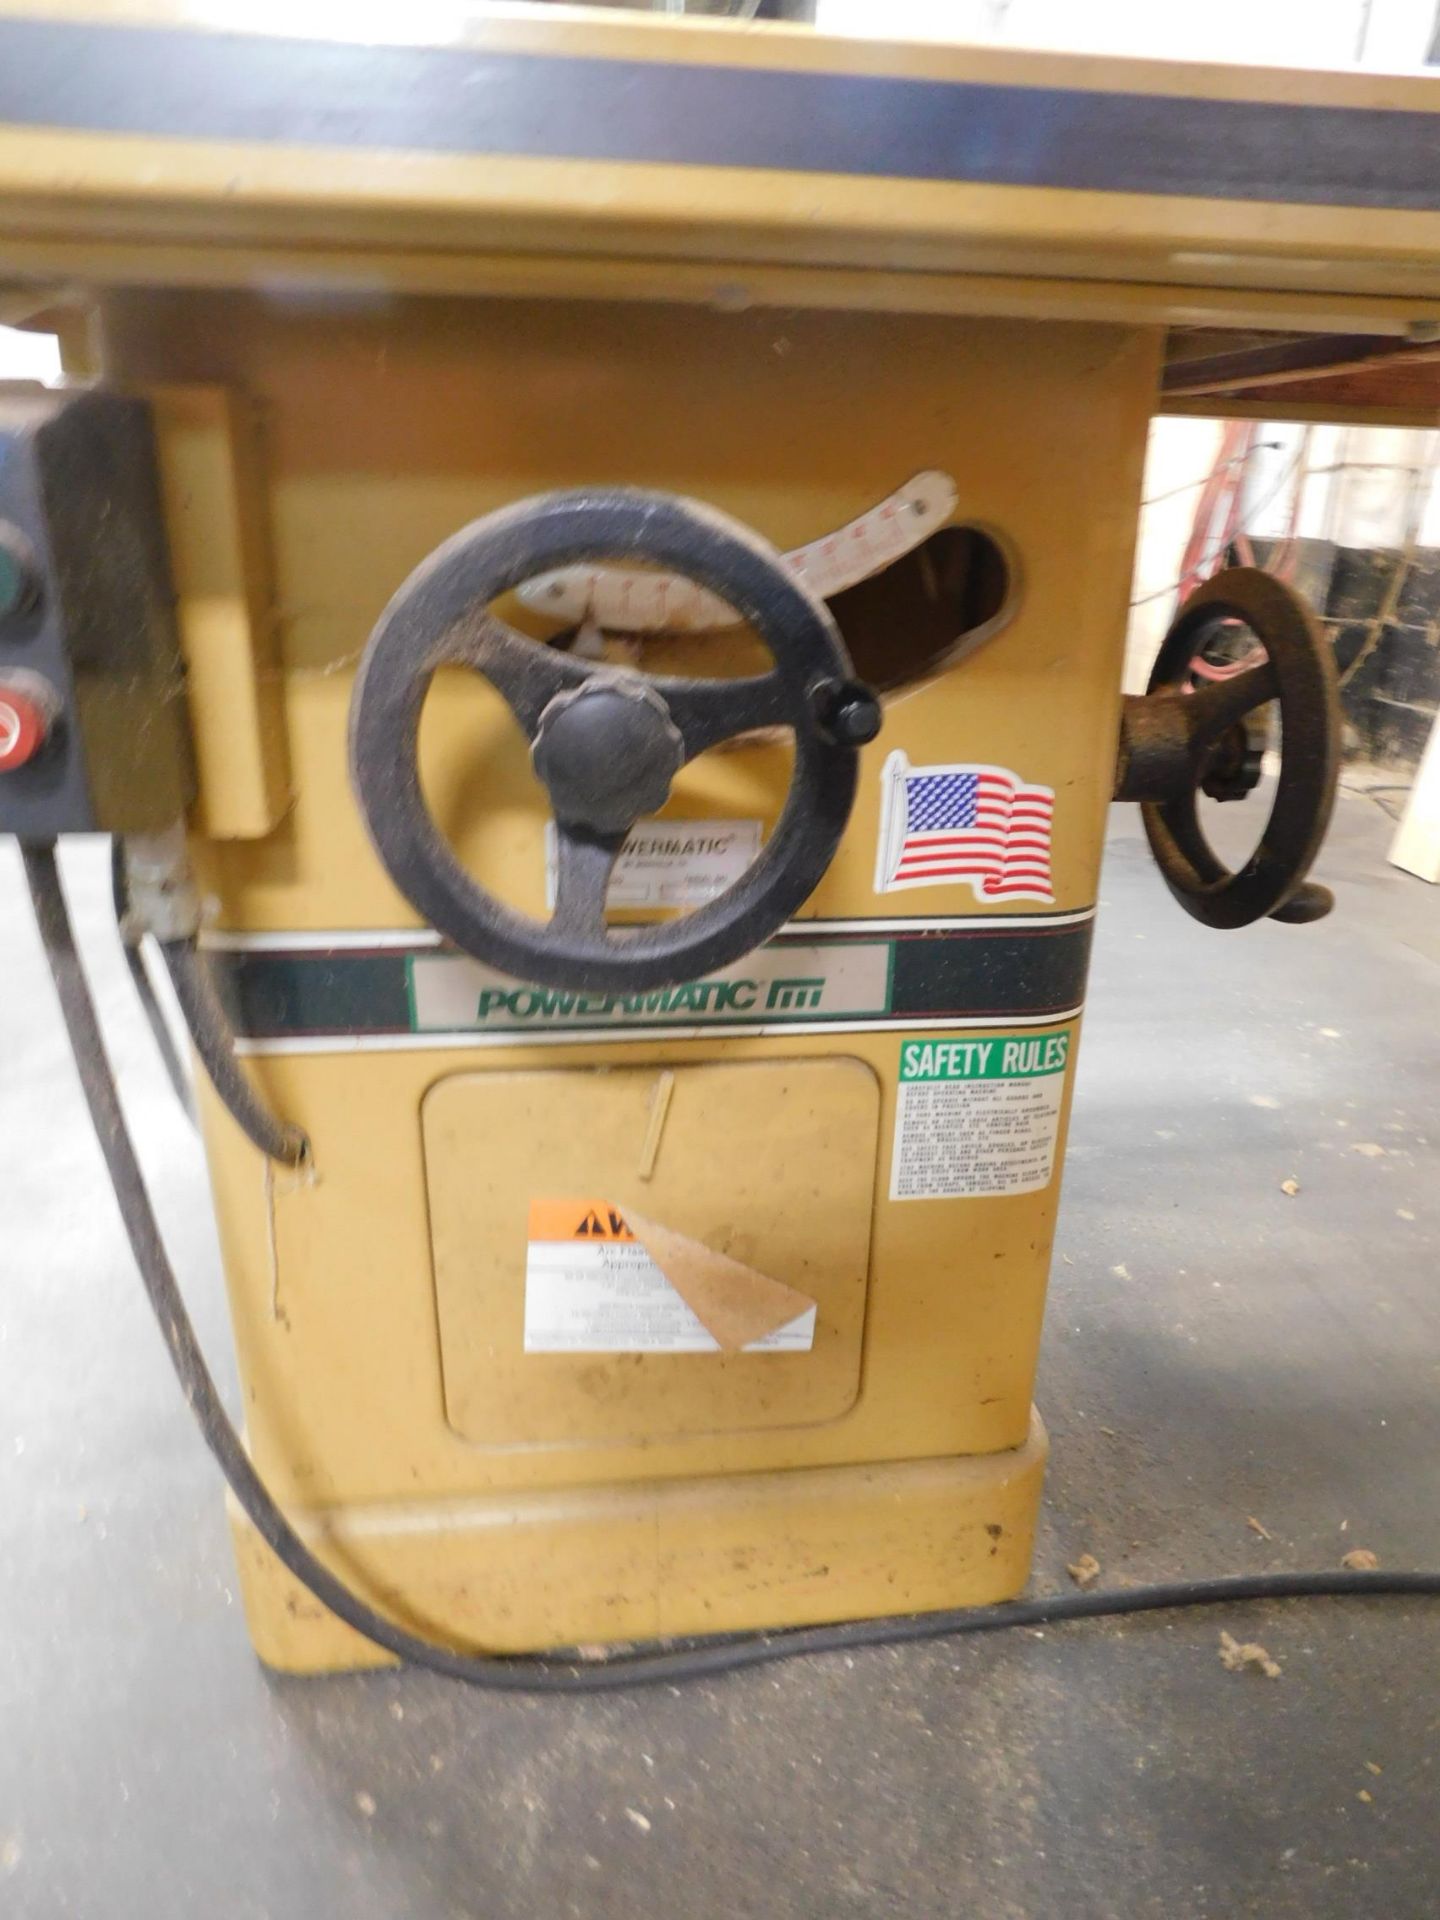 Powermatic Model 66, 10" Table Saw, s/n 93662581, with Fence and Miter Gauge, Loading Fee $100.00 - Image 4 of 6